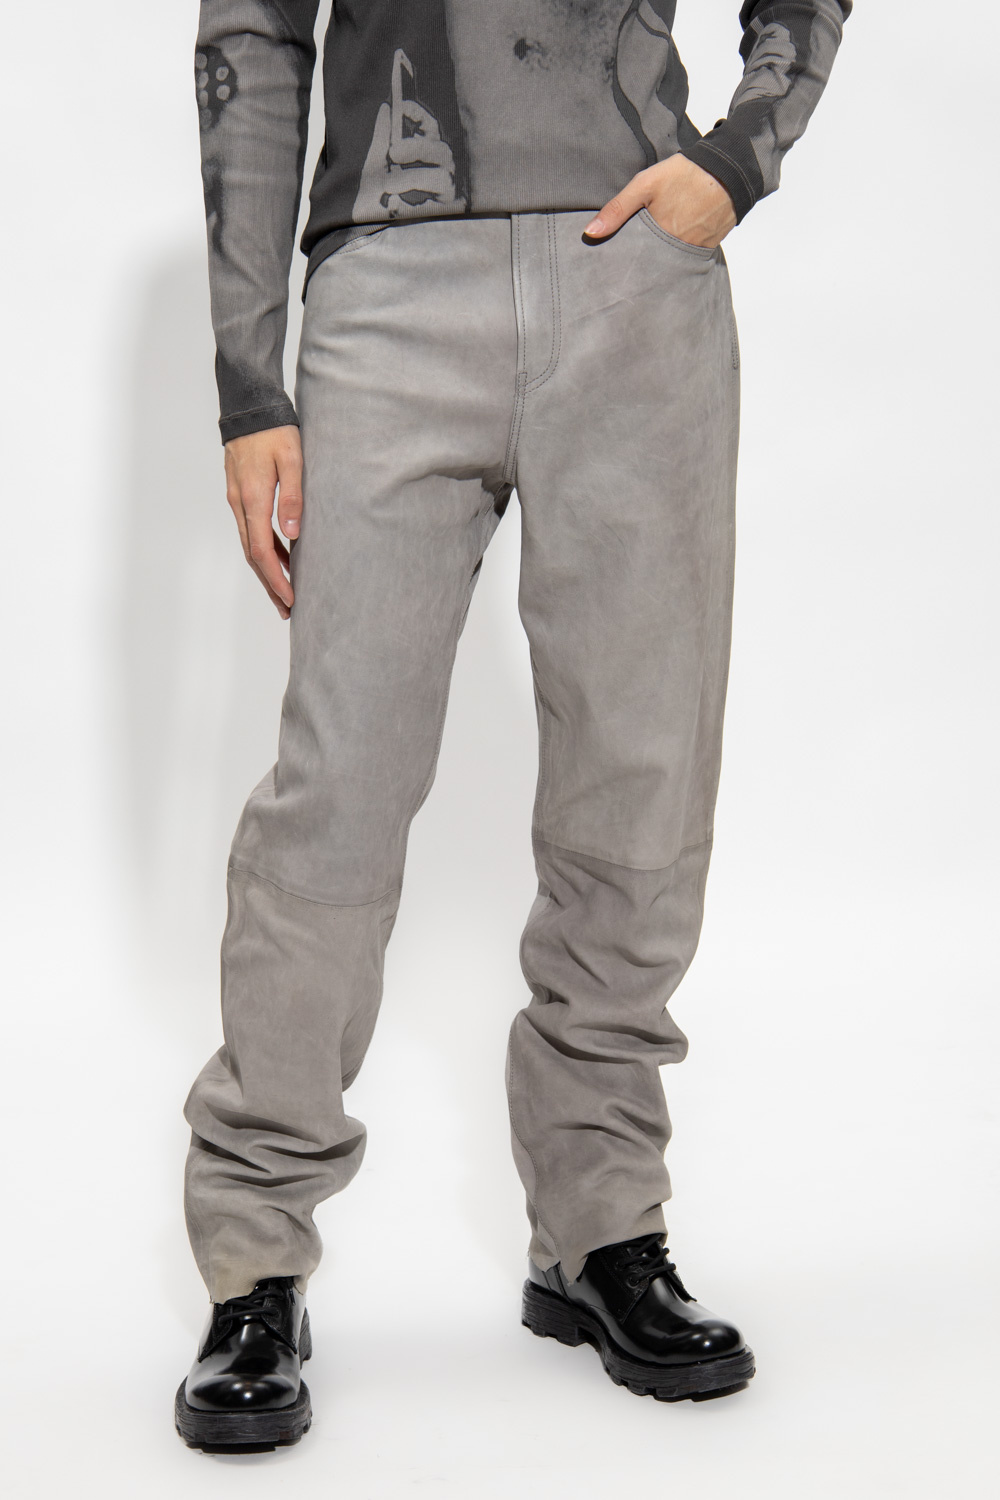 Diesel ‘P-MIC-A’ leather dog trousers